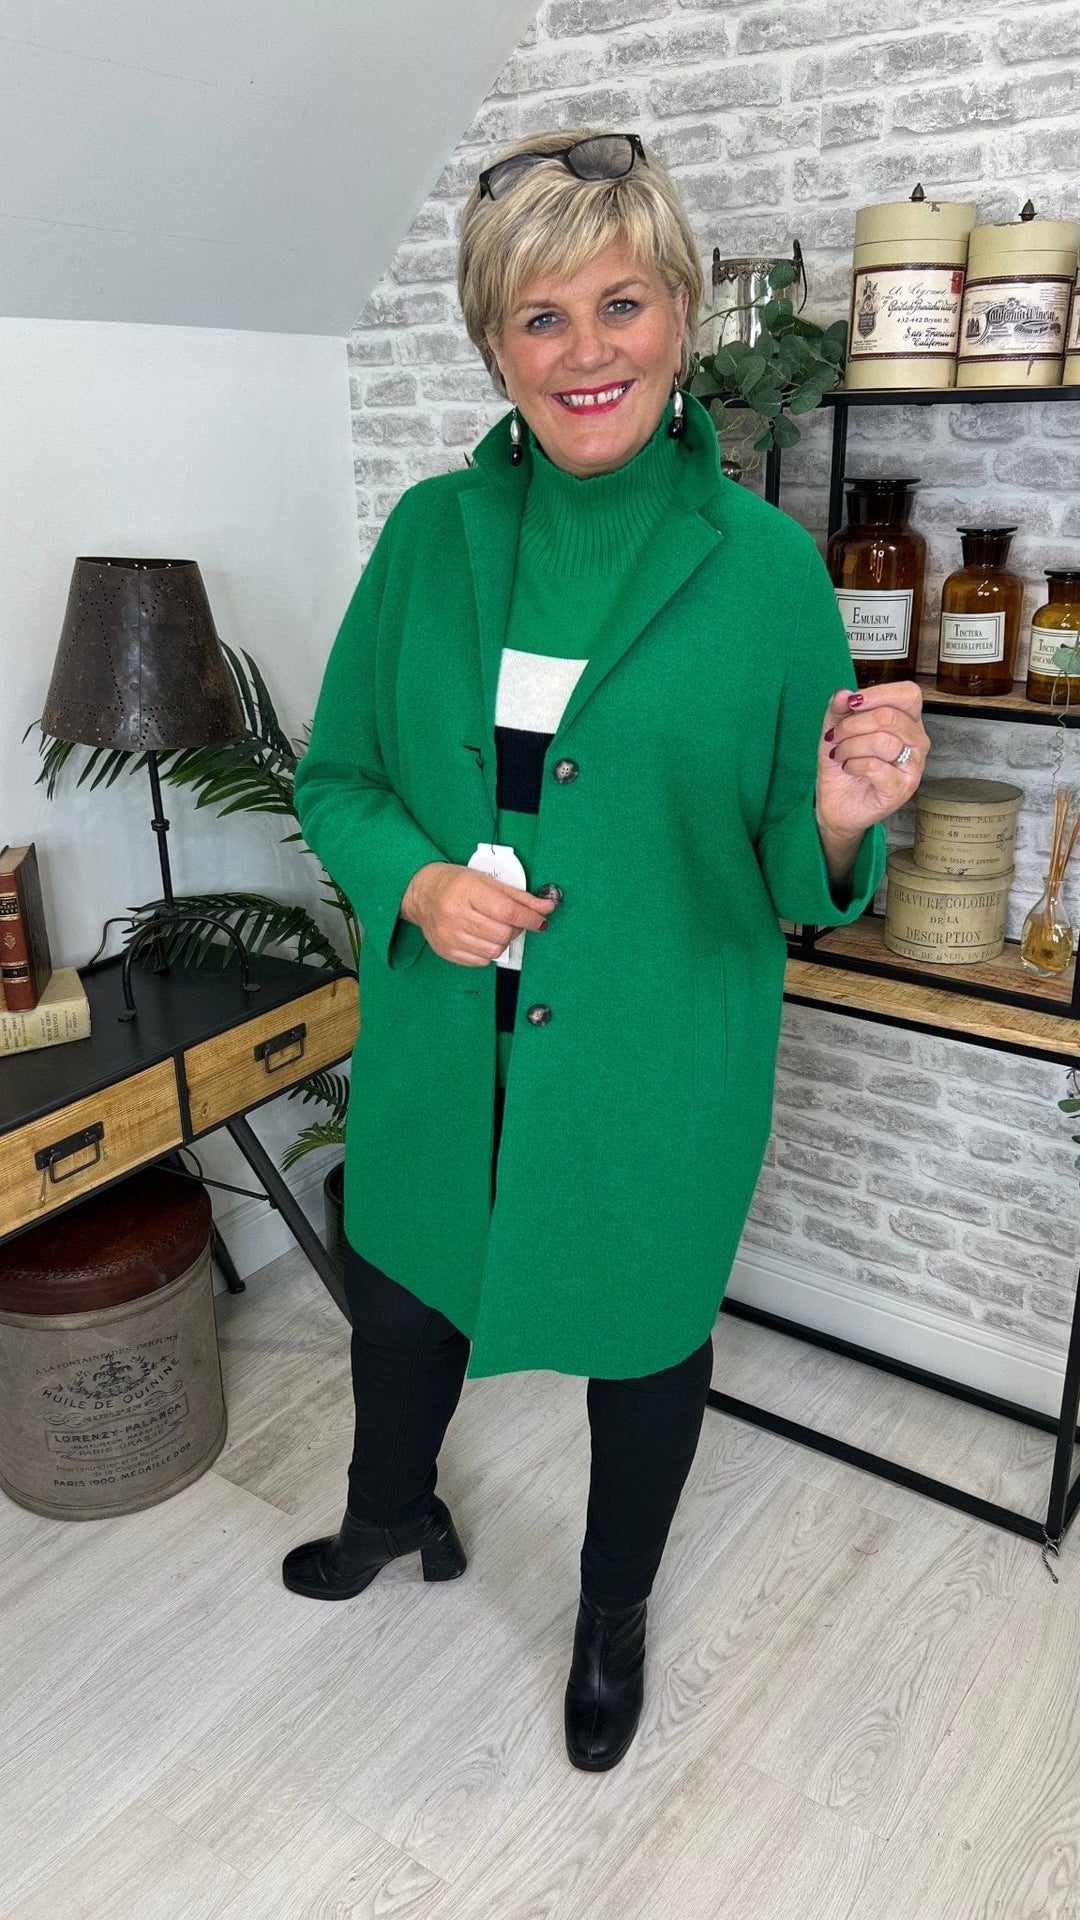 Oui Mayson Boiled Wool Coat In Green - Crabtree Cottage